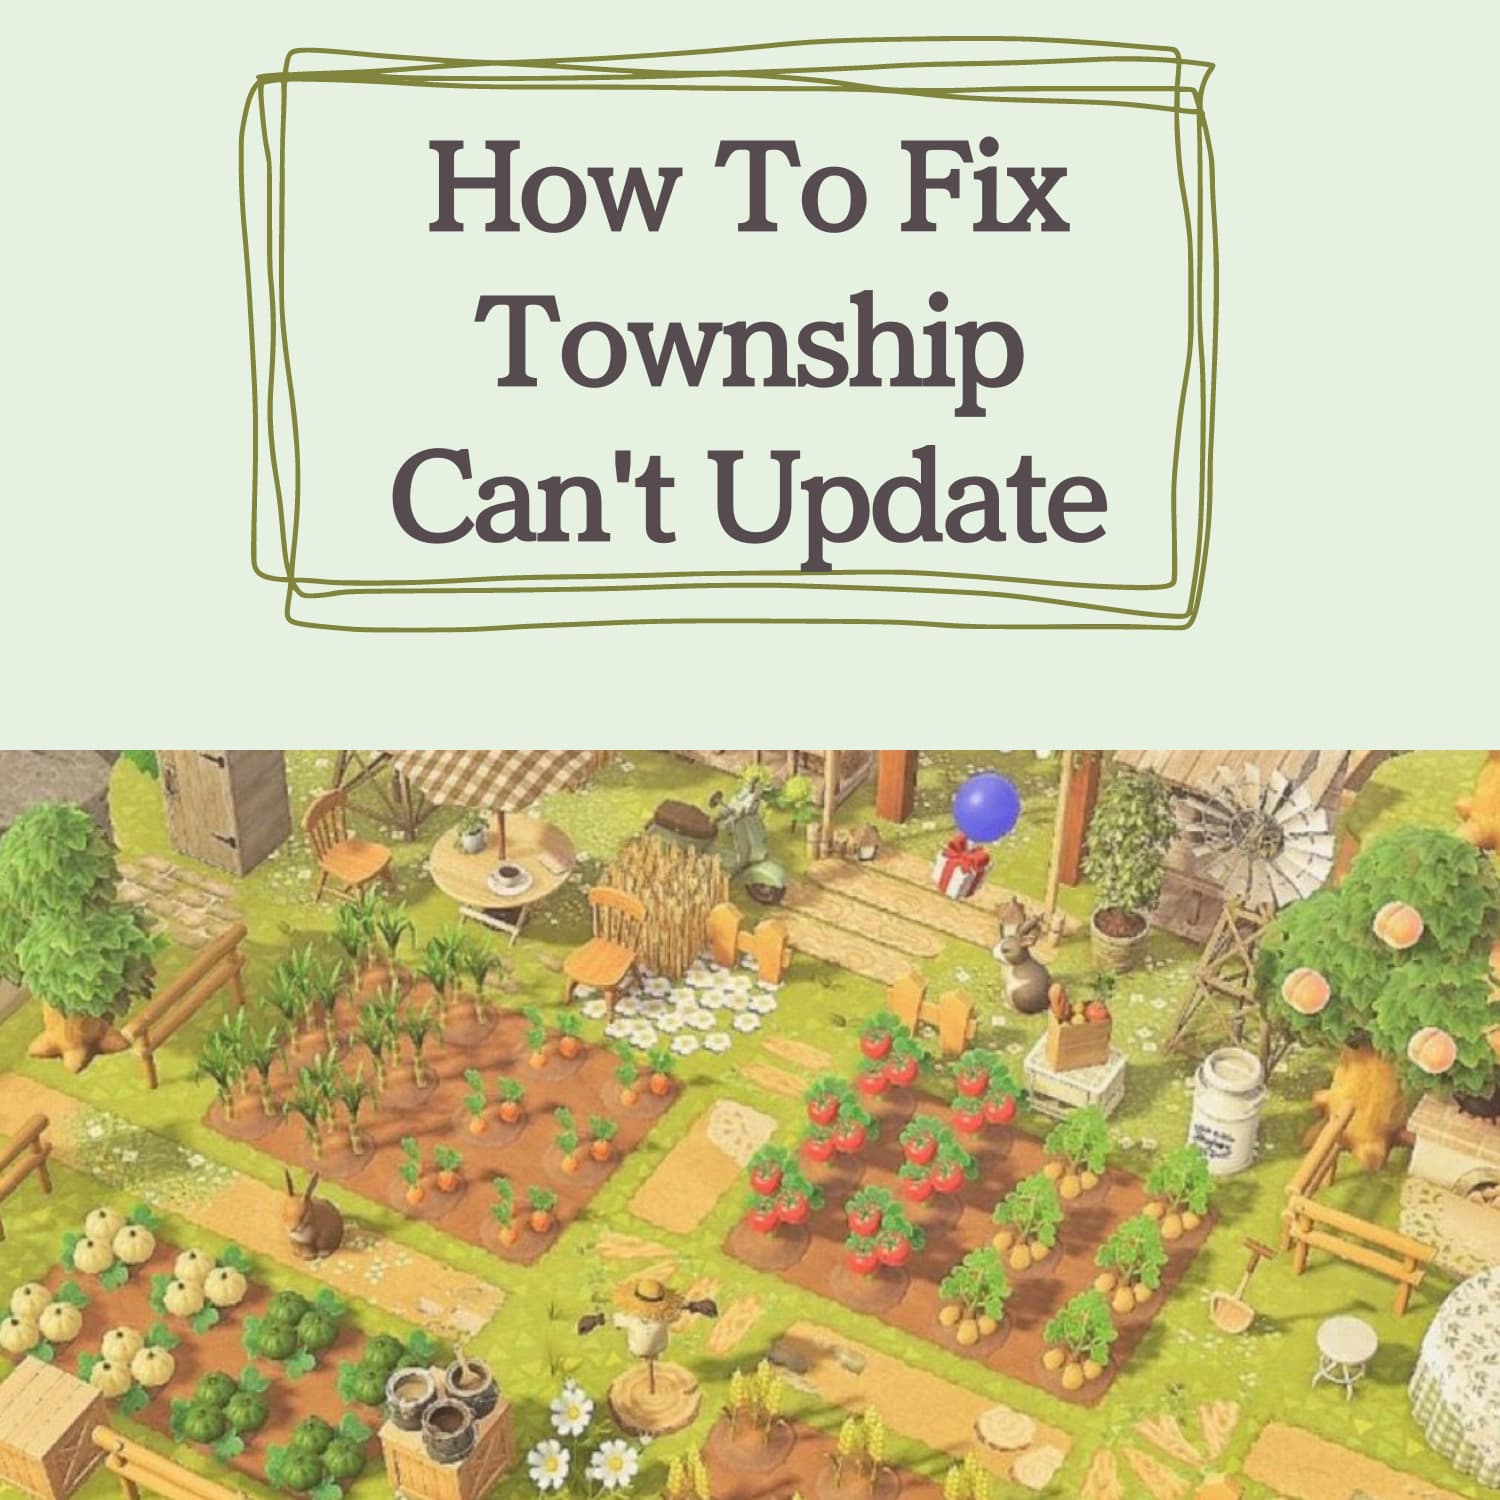 How To Fix Township(Township)Can't Update #Township